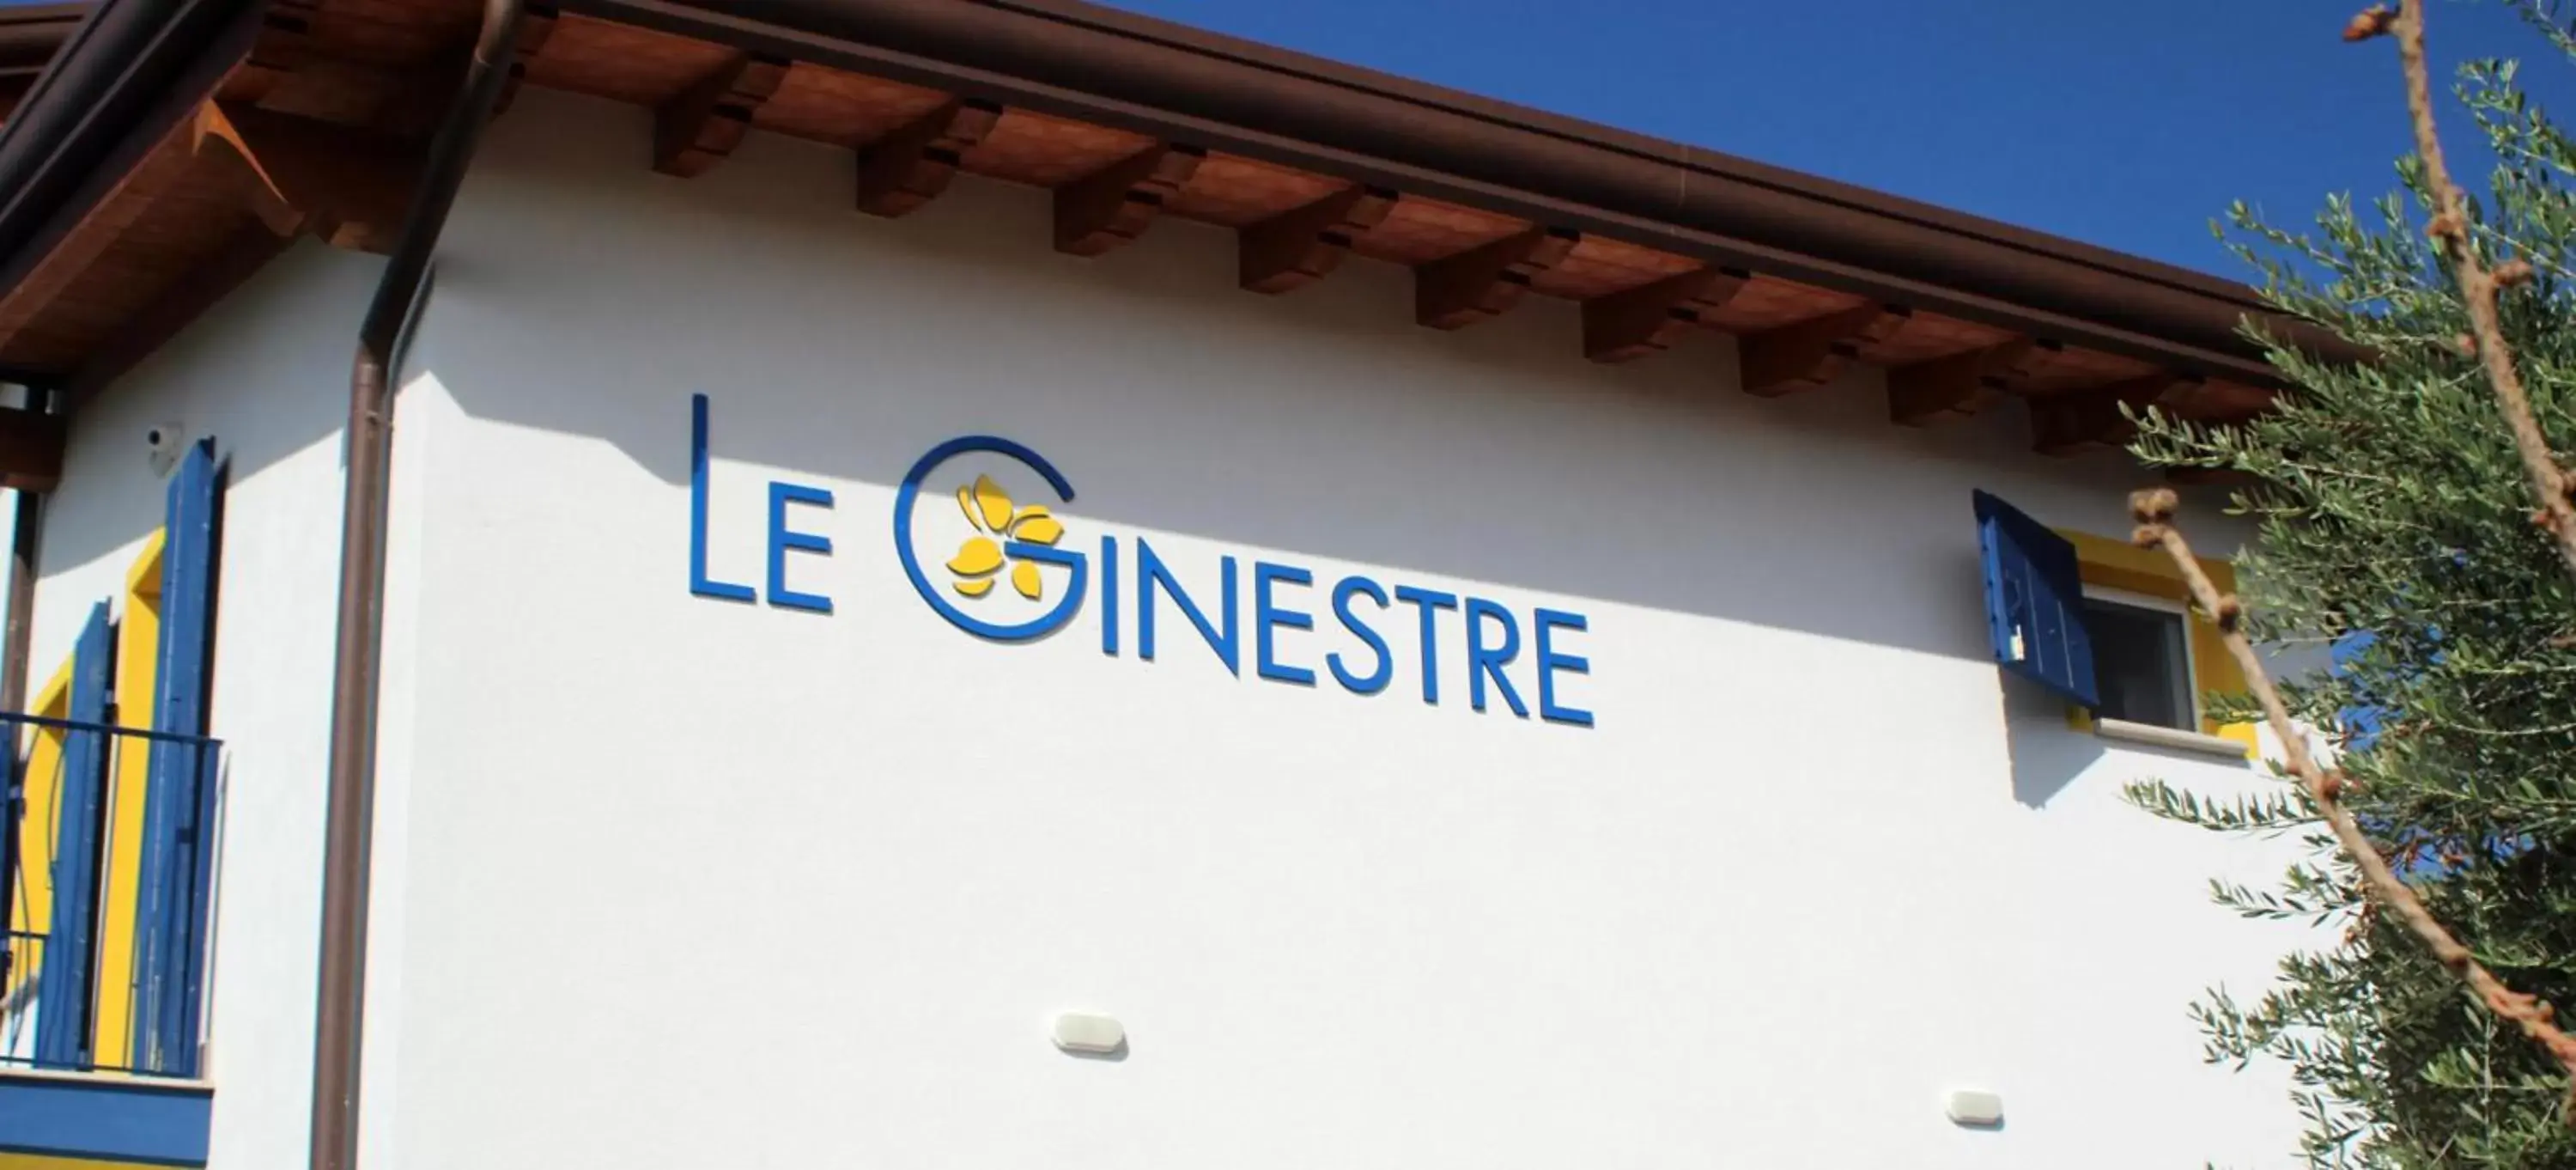 Property logo or sign, Property Building in Le Ginestre